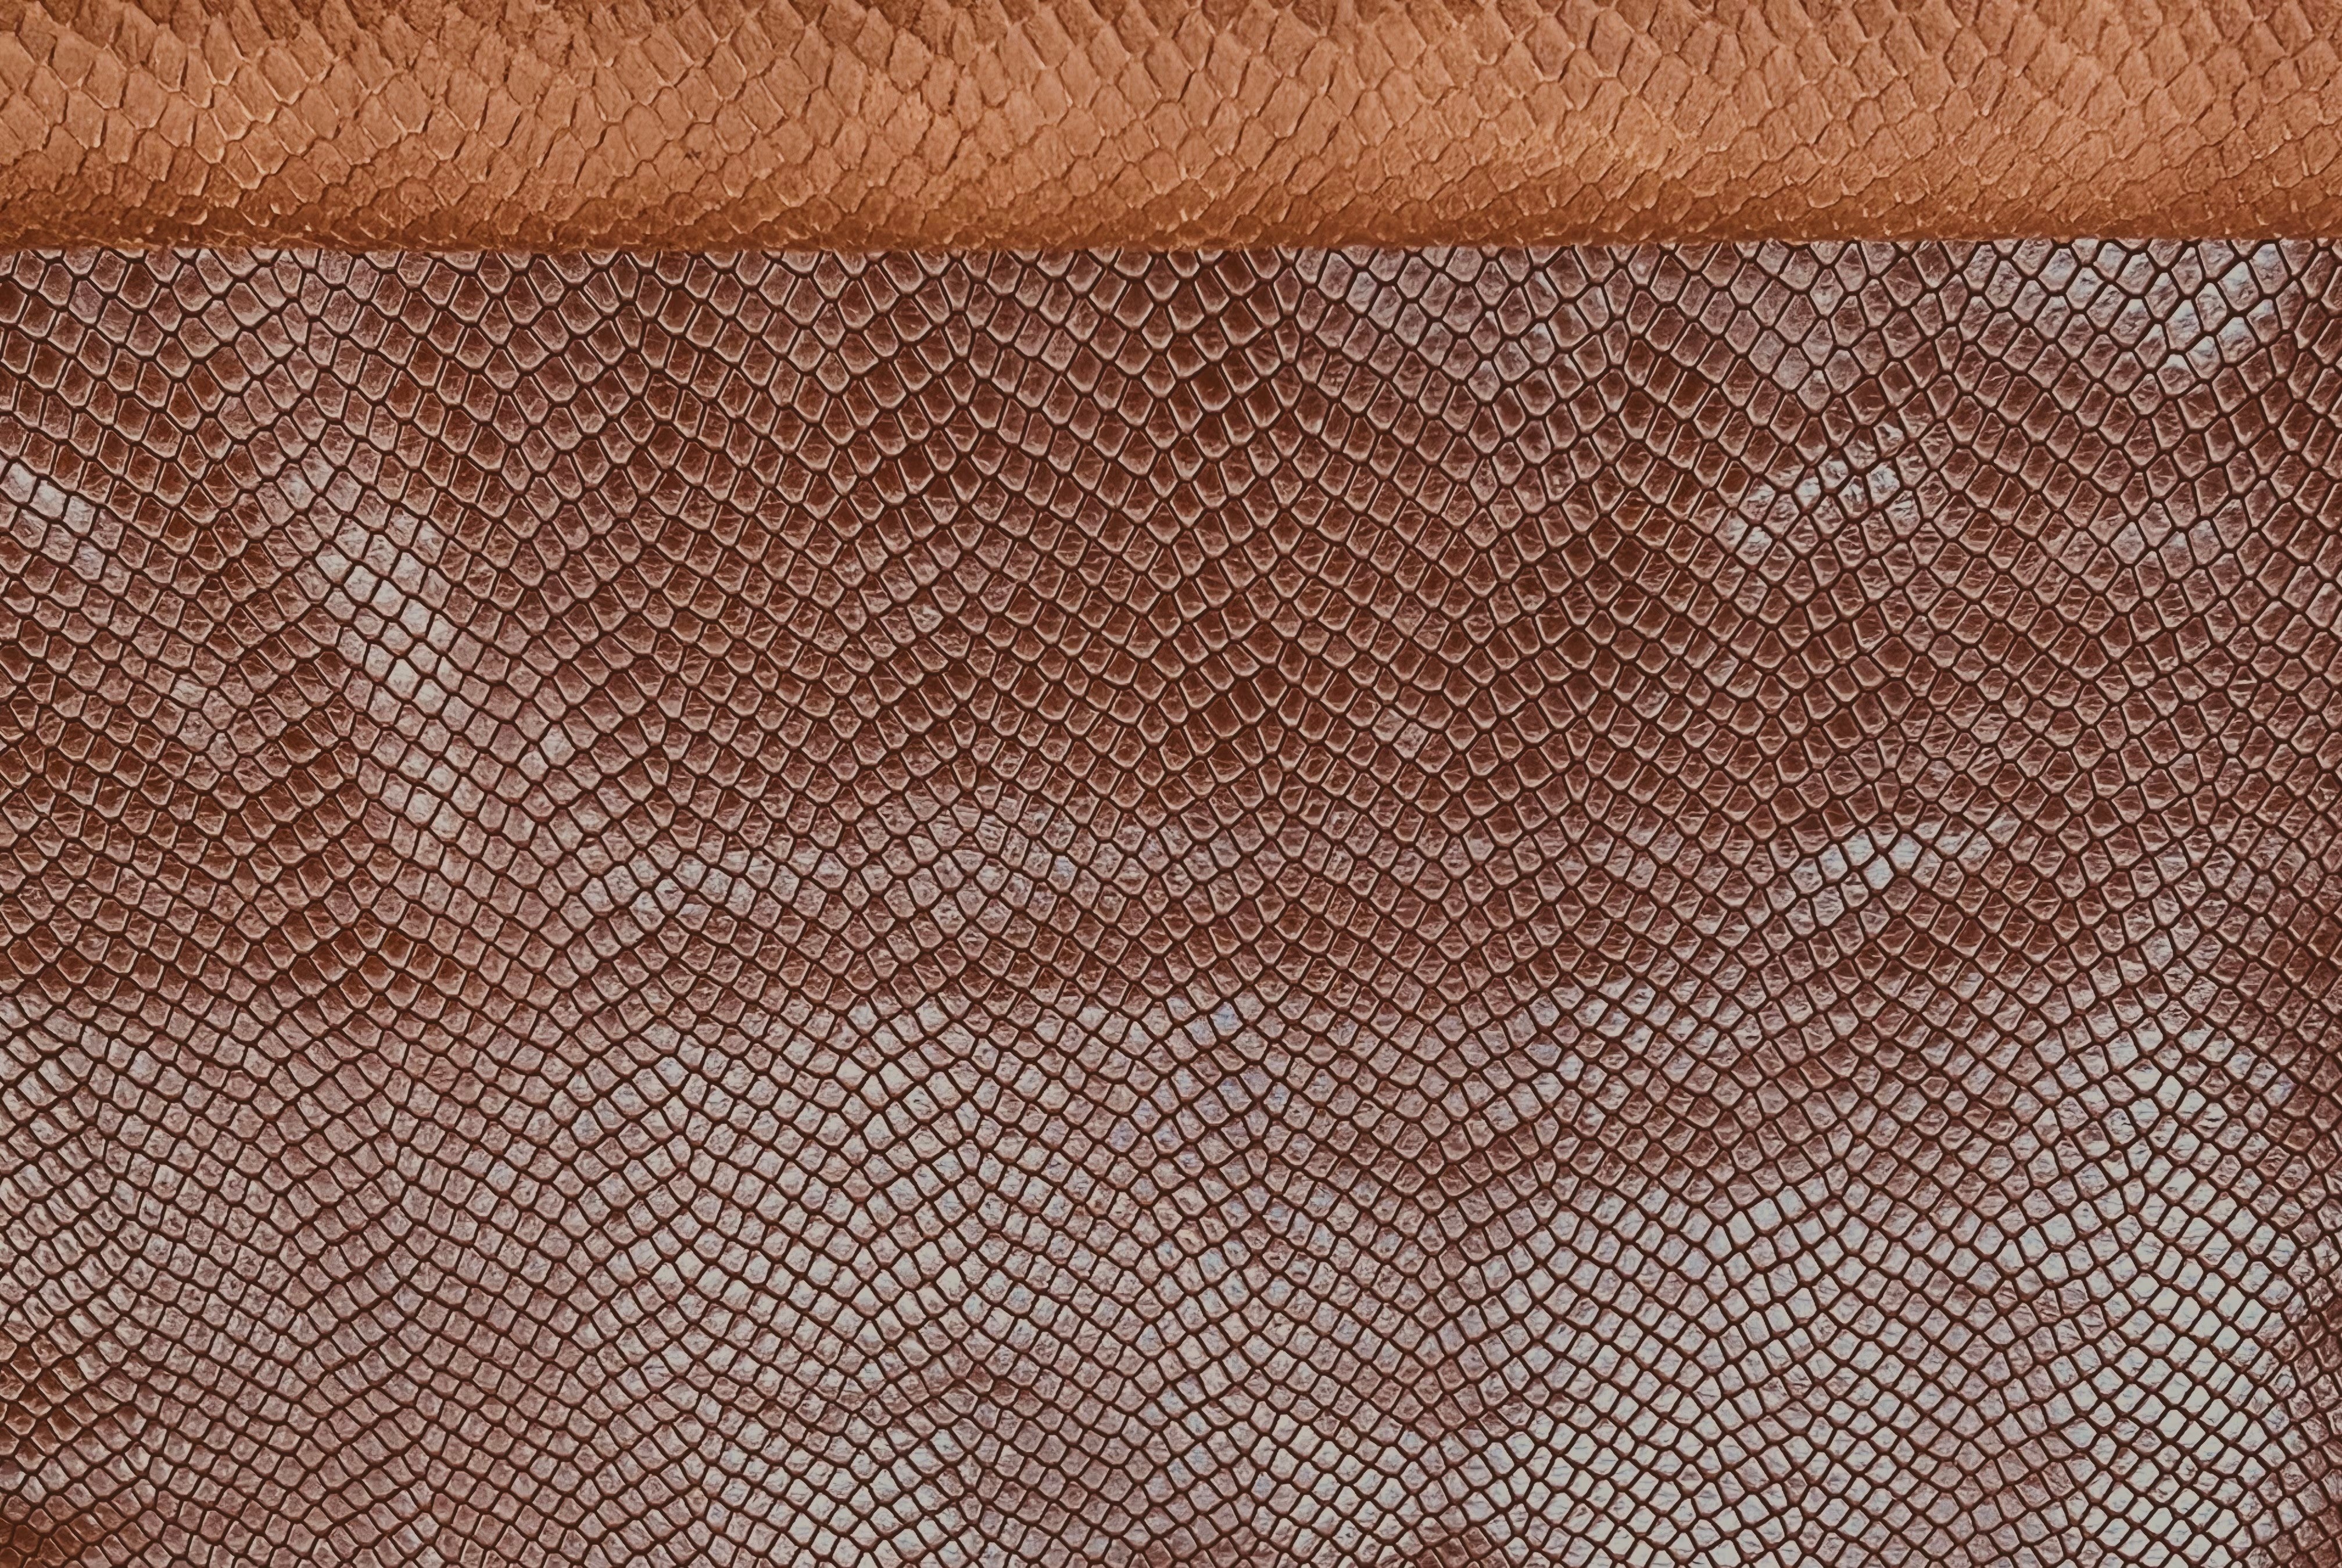 Embossed Glazed Leather Cow Side (0.9-1.0mm) Ref-gh.eol